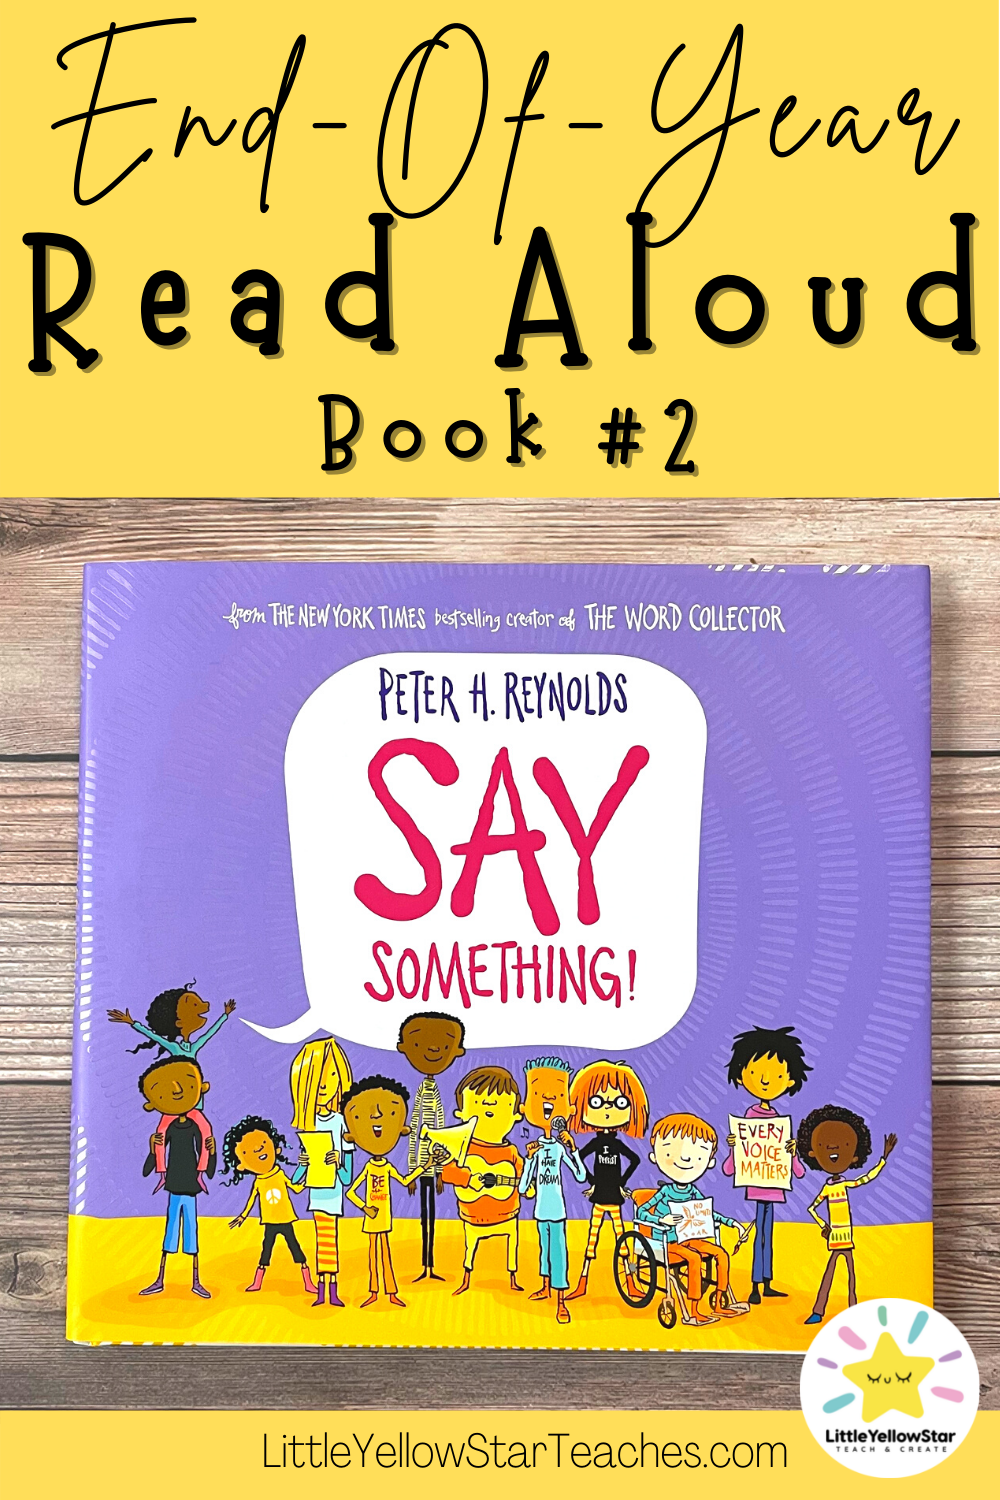 End of year read aloud book - Say Something by Peter H Reynolds. This is the perfect end of year read aloud book for the classroom! Pin this image to come back to the blog for details on this end of year read aloud lesson plan.